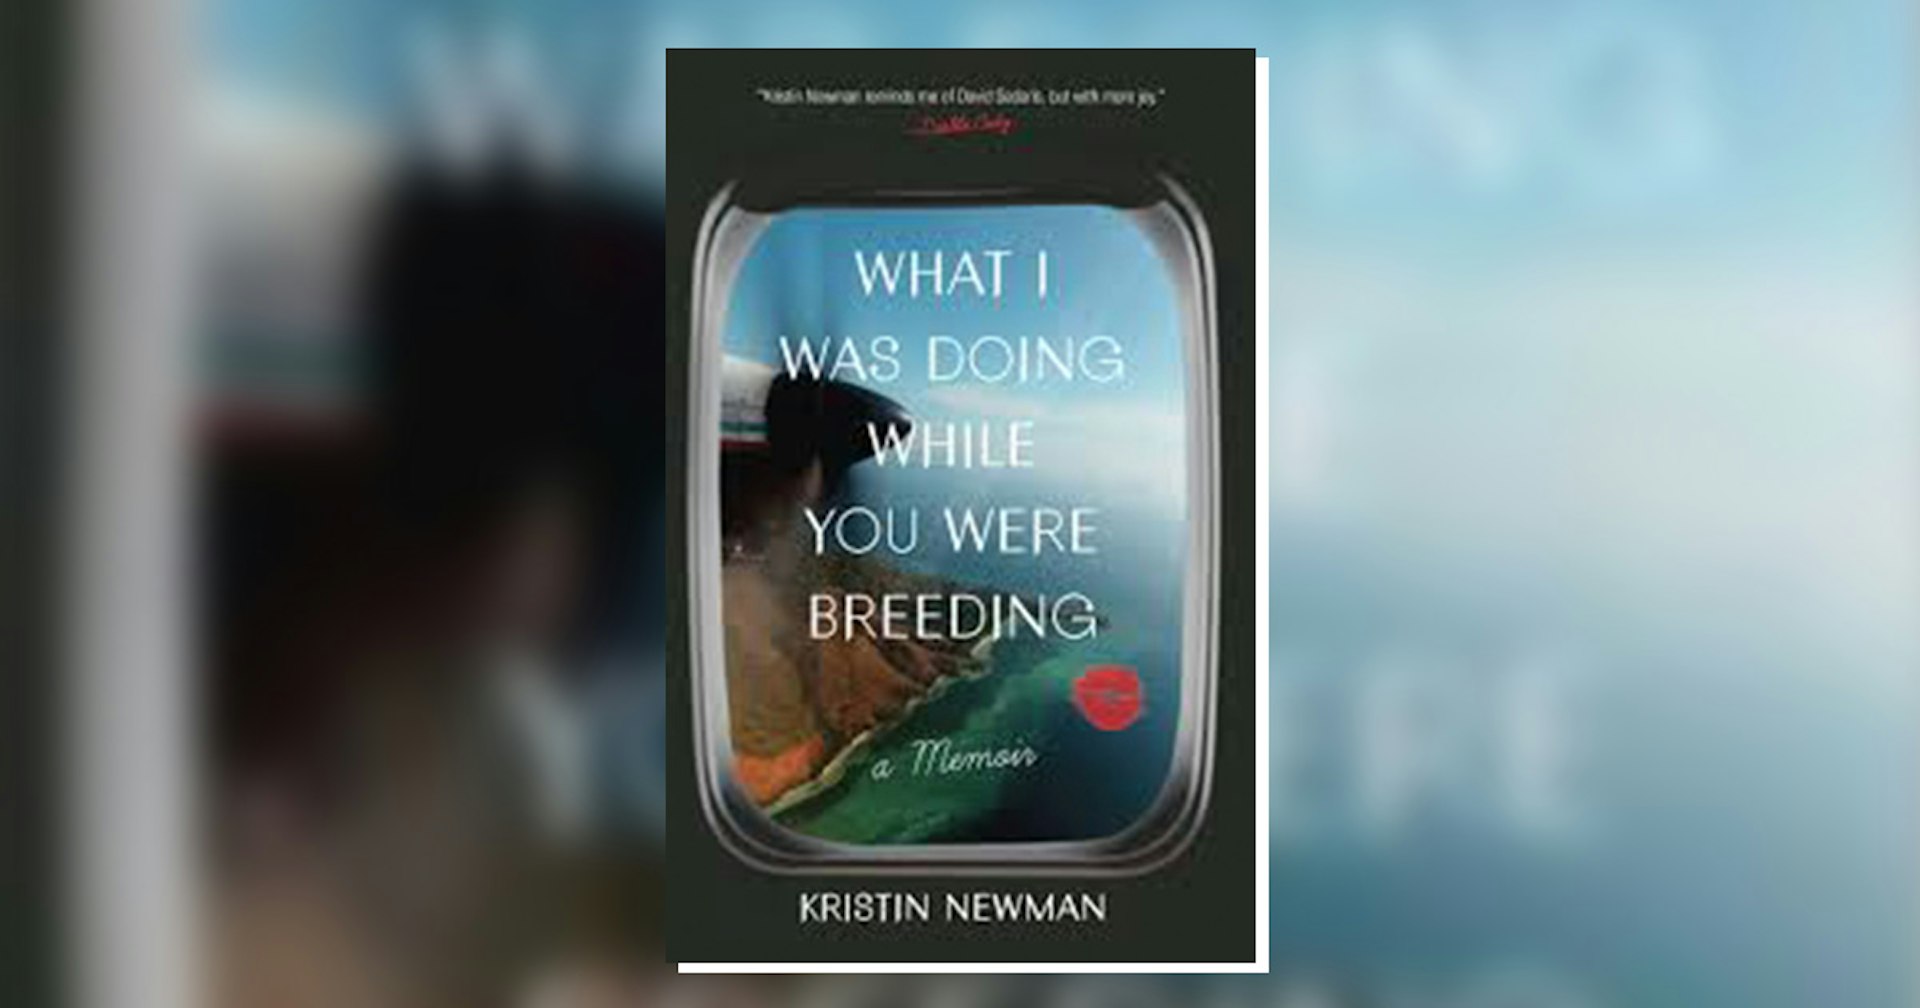 While You Were Breeding book cover